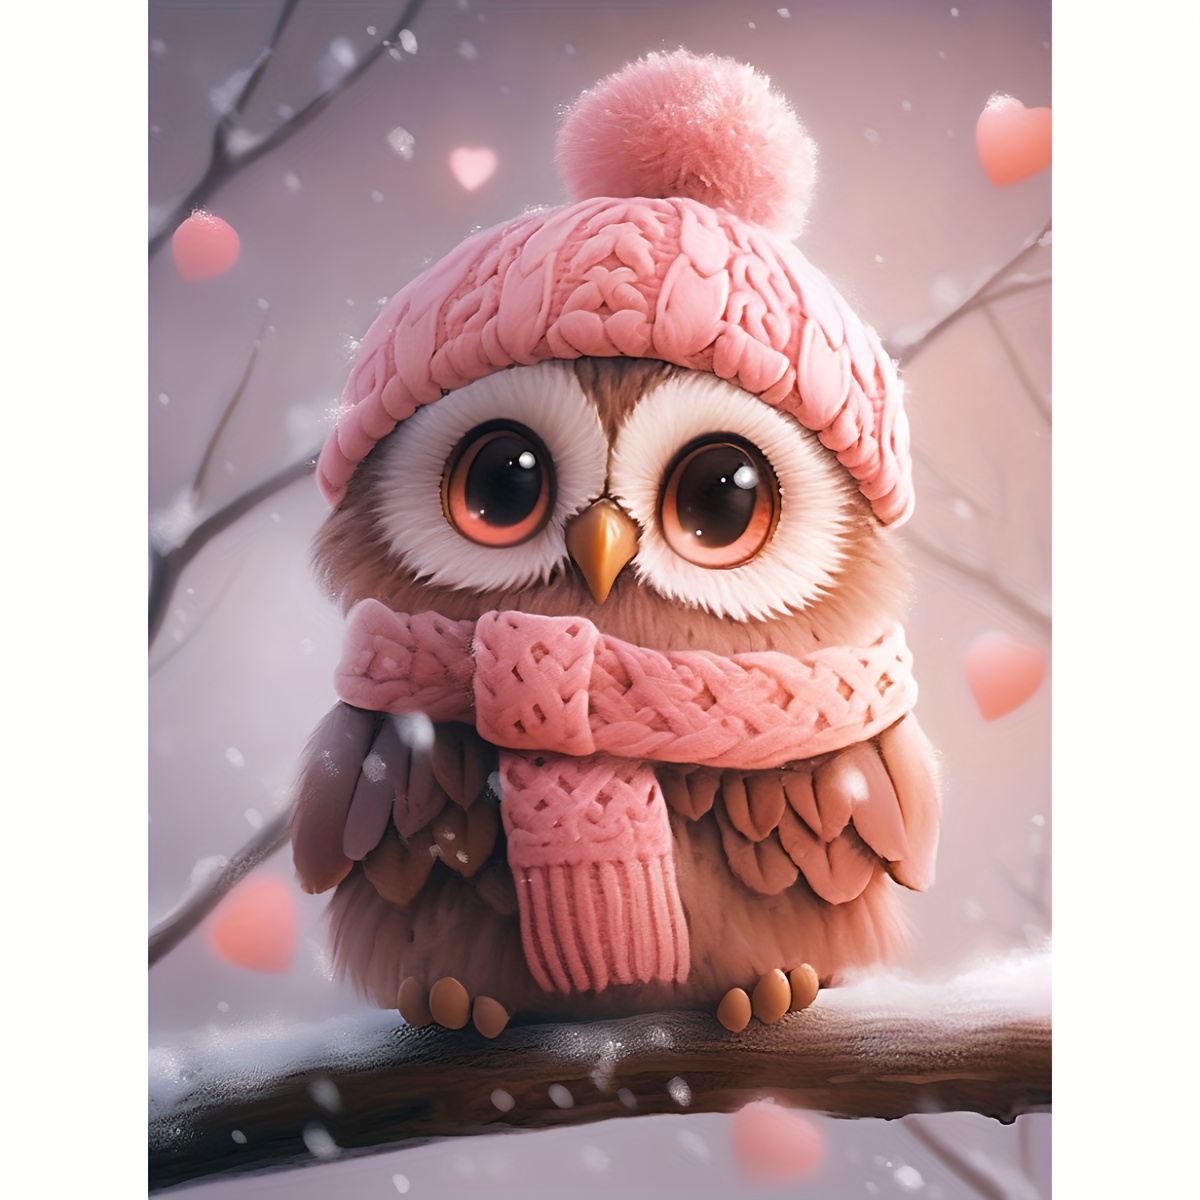 5D Adult Diamond Painting, Cute Owl with Coloured Diamonds Diamond Painting  Kits, Suitbale for Beginners and Children Handmade DIY Holiday Gift or